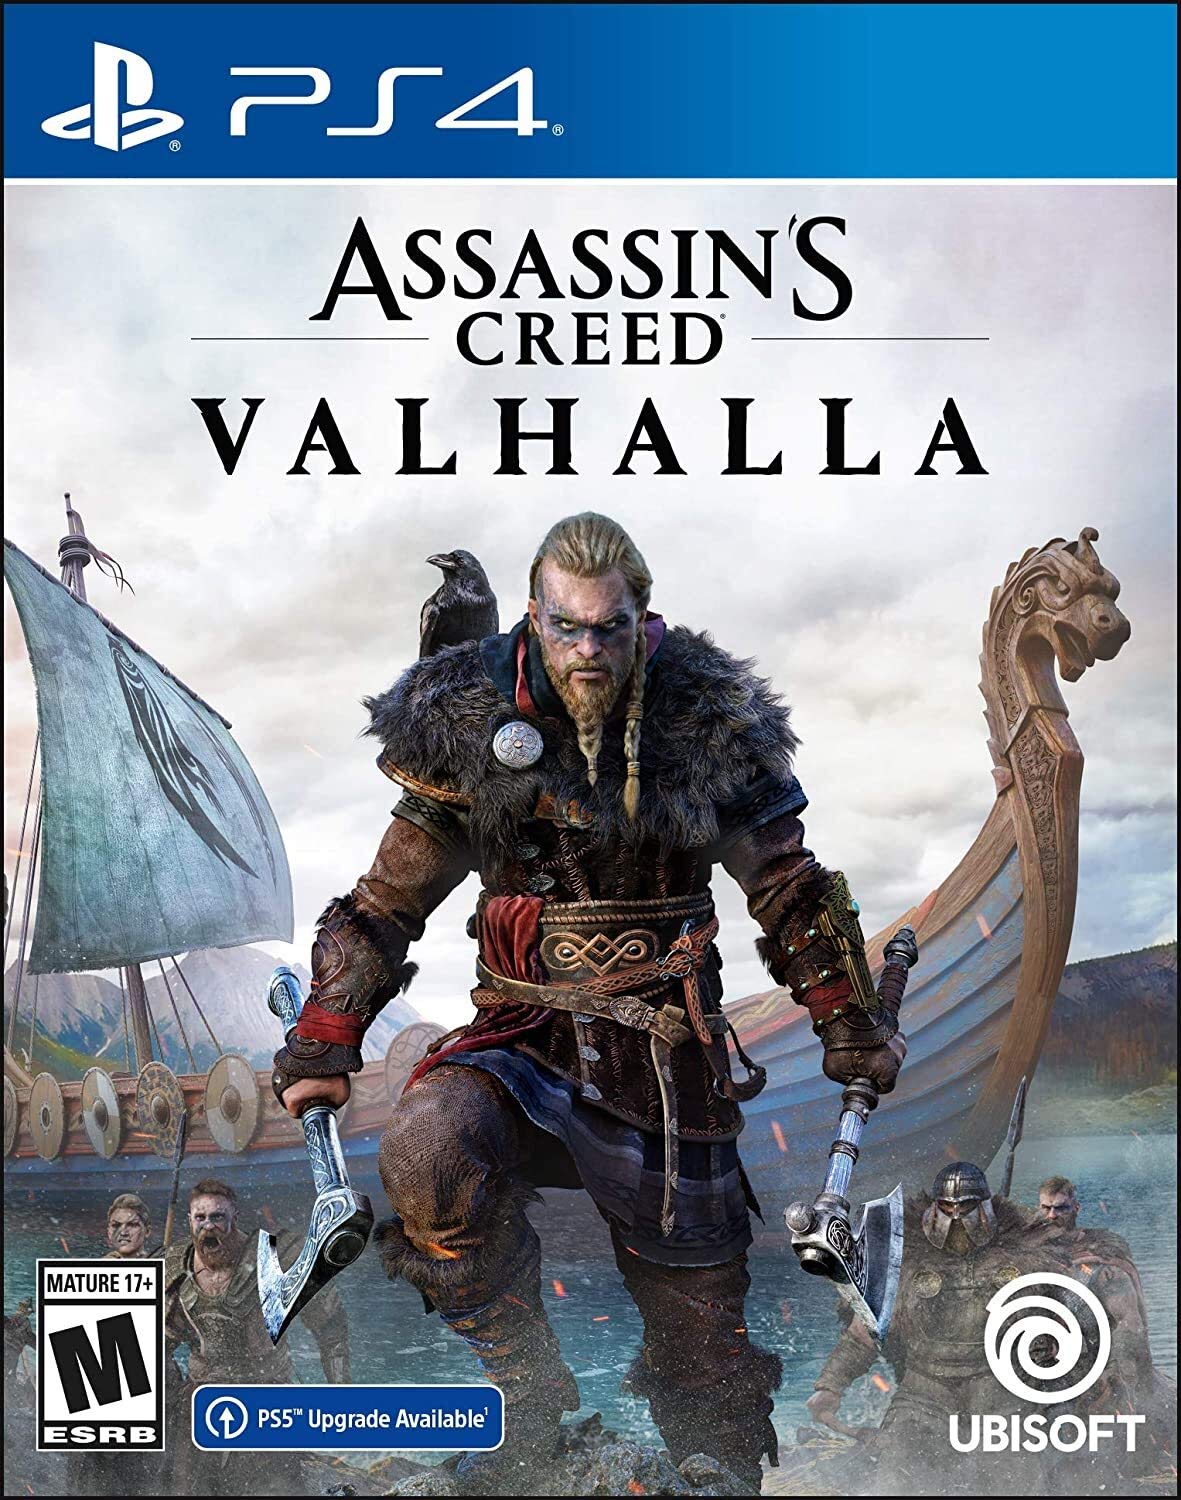 Assassin’s Creed Valhalla PlayStation 4 Standard Edition with Free Upgrade to the Digital PS5 Version-Stumbit Entertainment